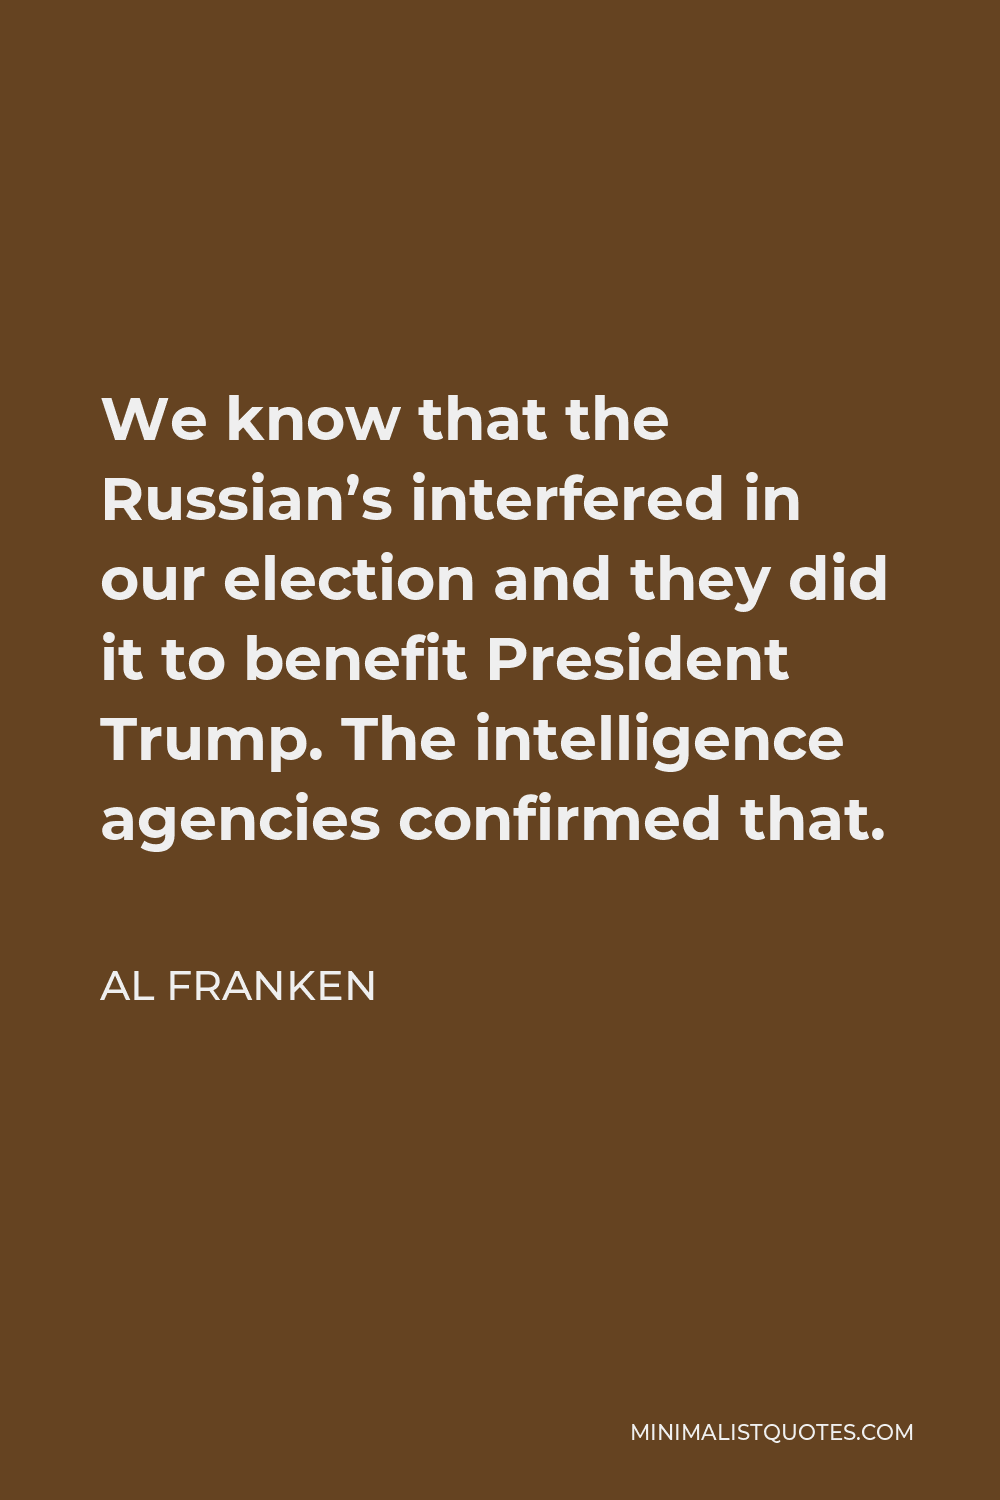 Al Franken Quote - We know that the Russian’s interfered in our election and they did it to benefit President Trump. The intelligence agencies confirmed that.